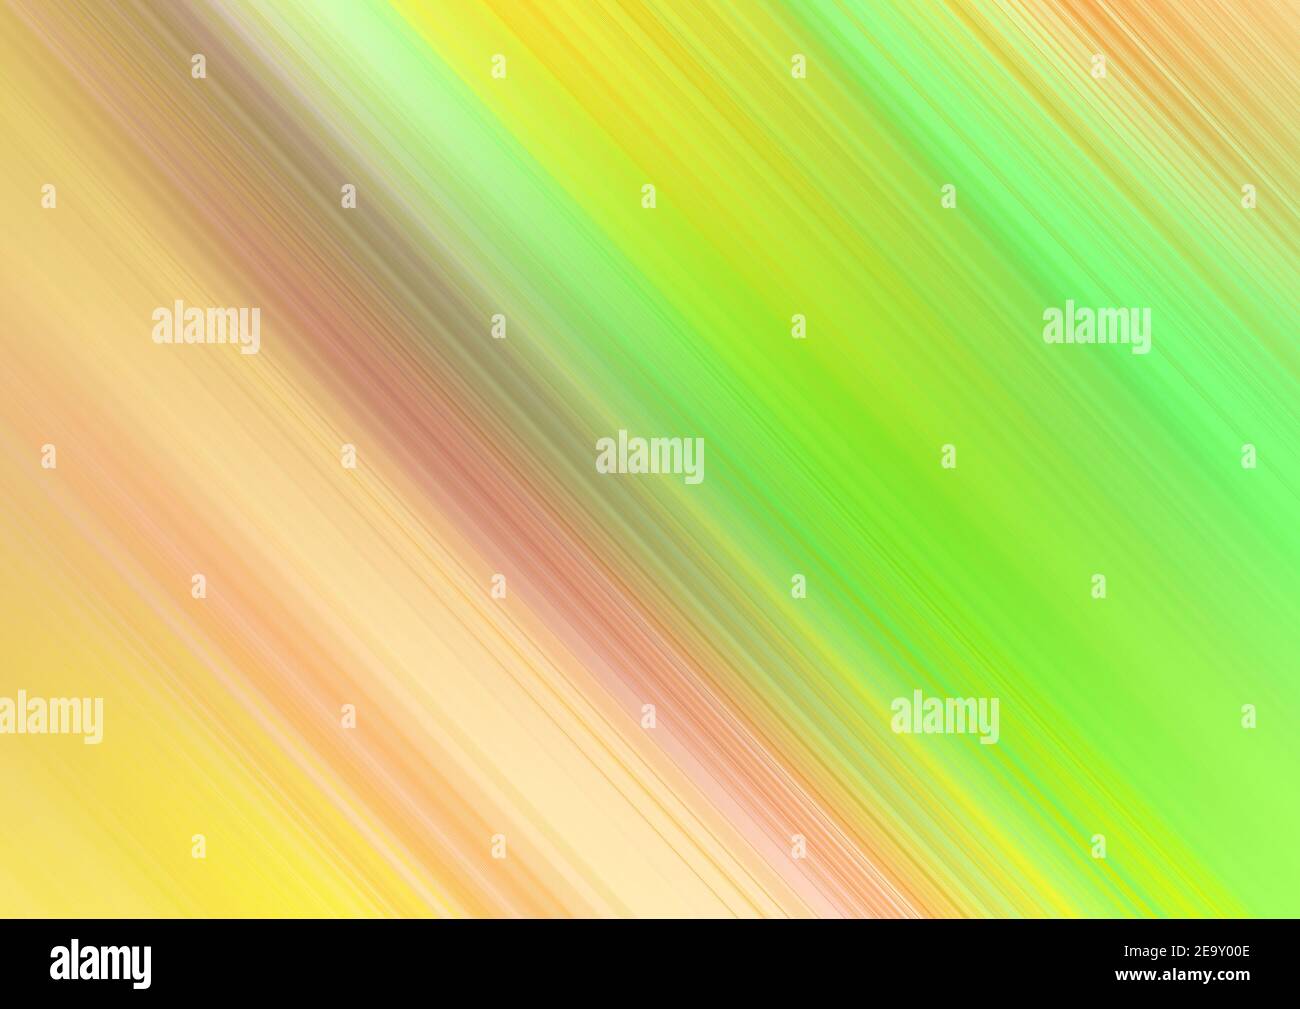 yellow orange green brown motion blur abstract background Stock Photo